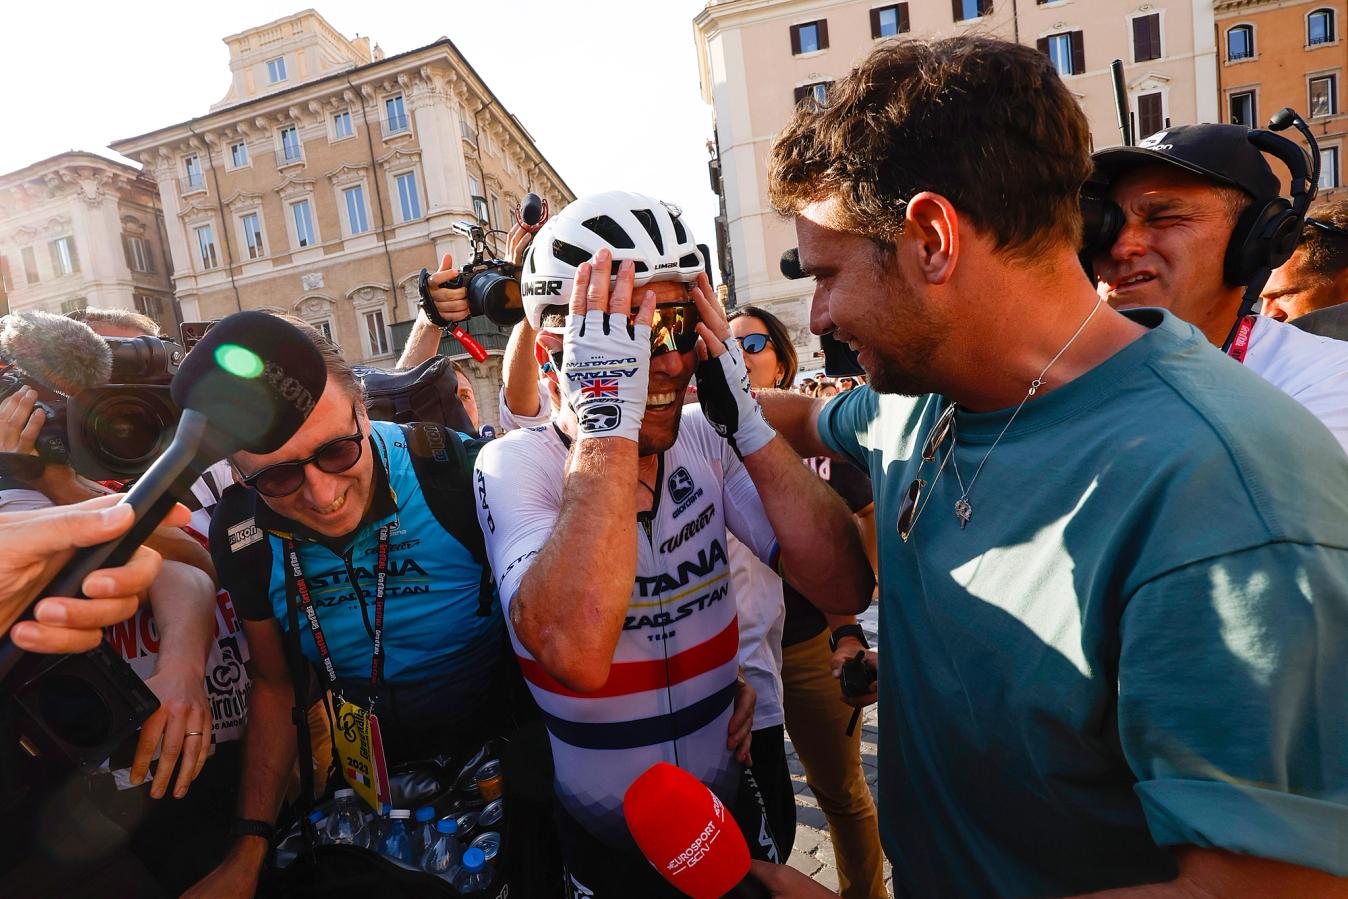 The racing did, however, provide a great capstone to the Giro, with Mark Cavendish taking a huge sprint victory